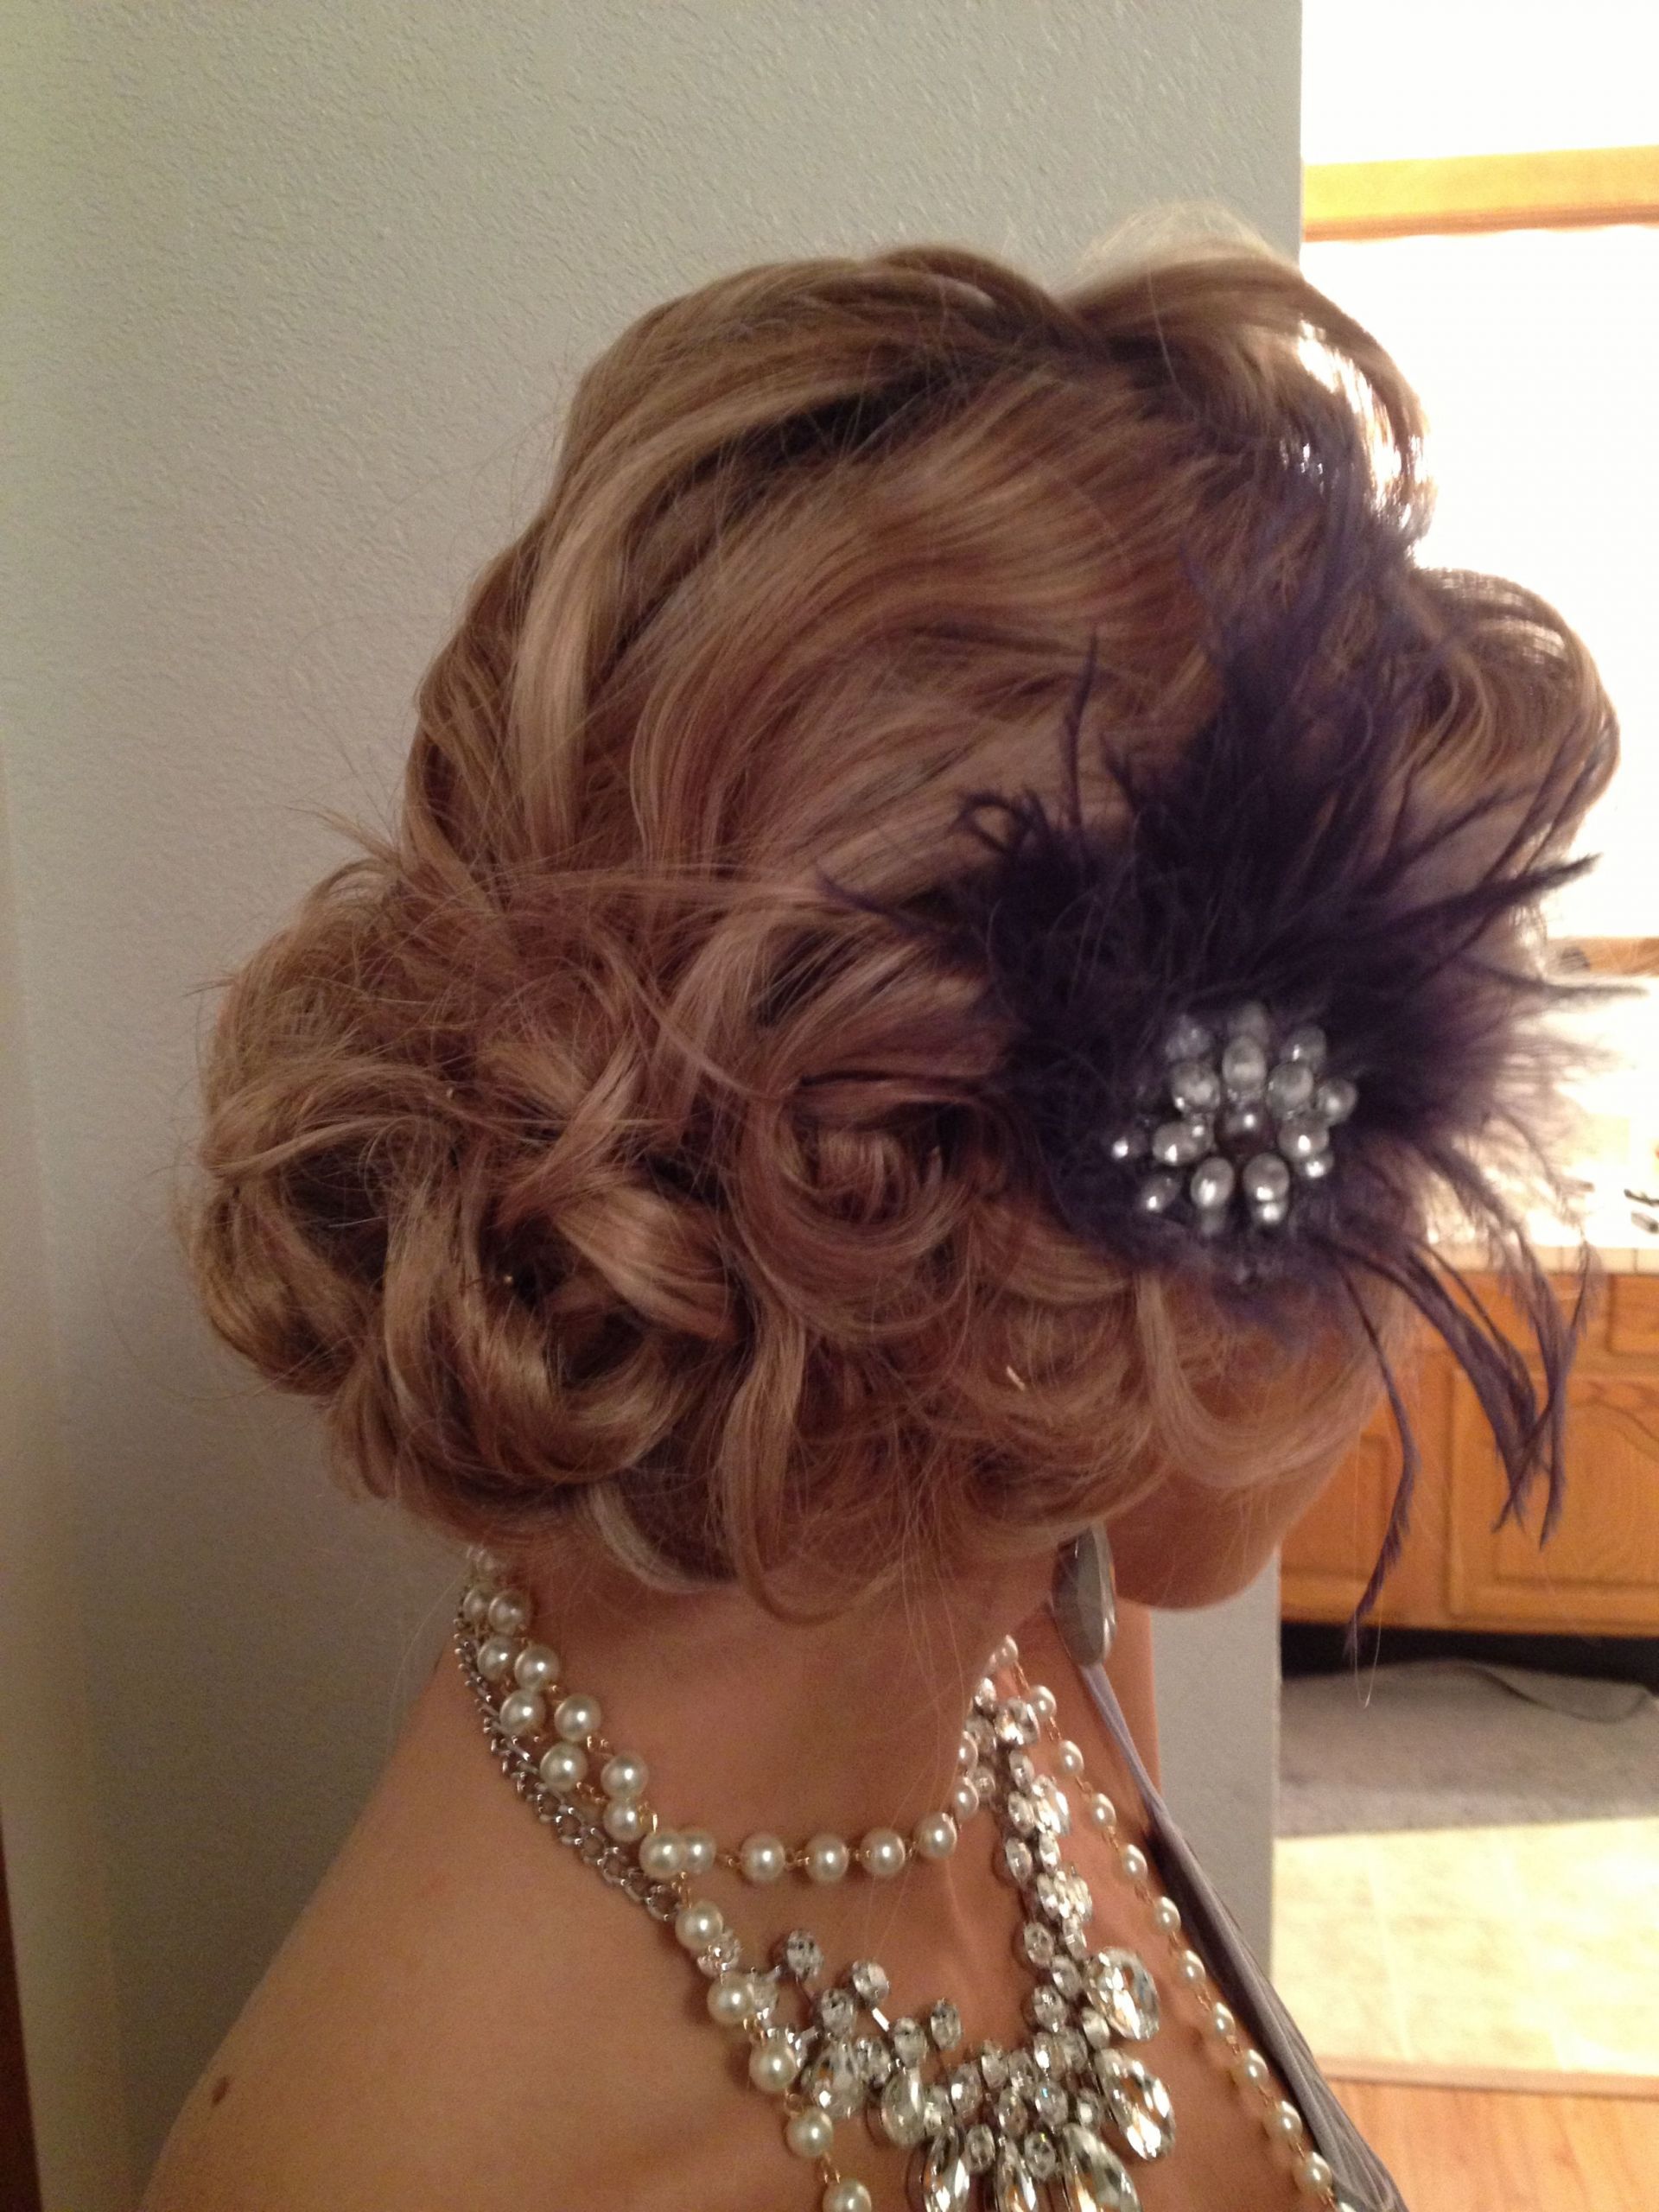 How To Do A 1920S Hairstyle For Long Hair
 Vintage 1920 s updo